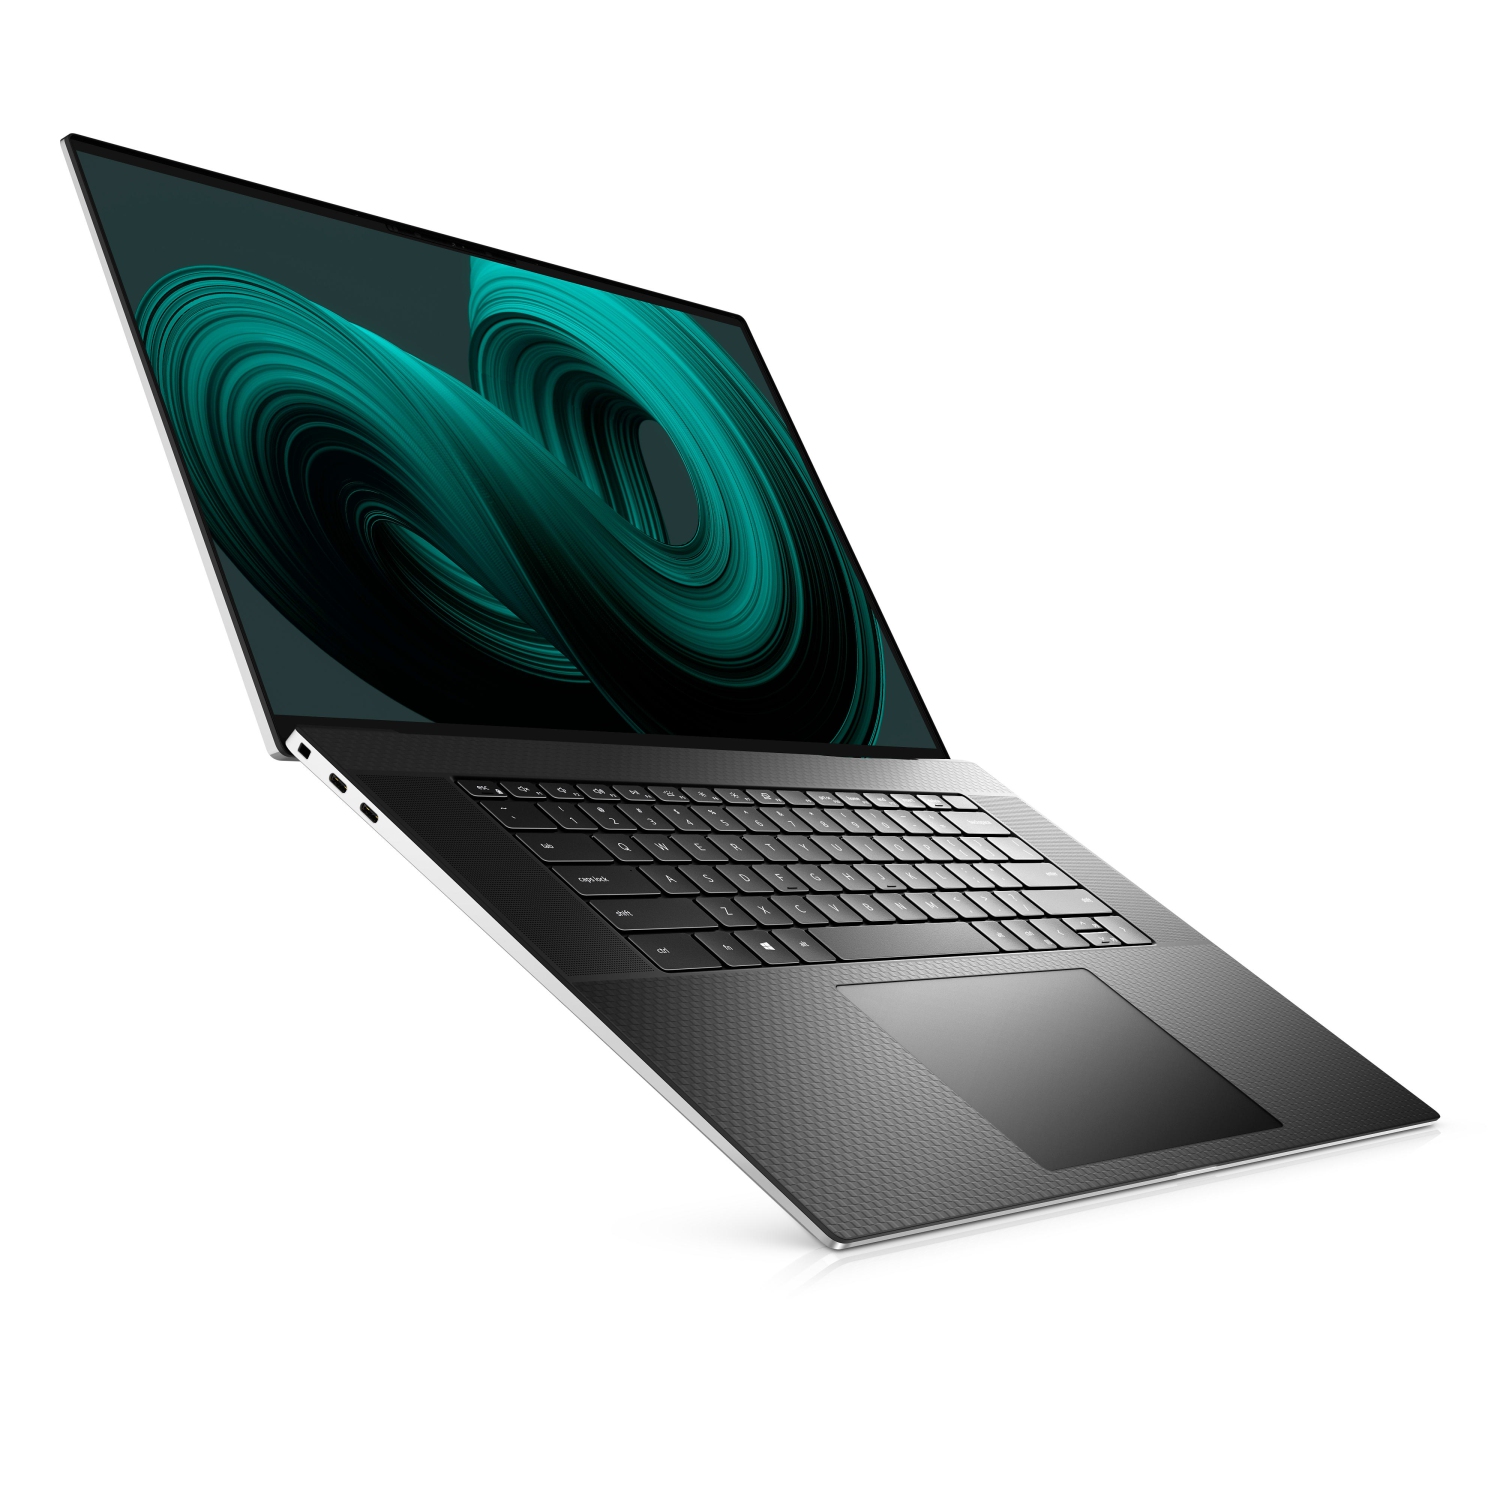 Refurbished (Excellent) - Dell XPS 17 9710 Laptop (2021), 17" 4K Touch, Core i9 - 512GB SSD - 32GB RAM - RTX 3060, 8 Cores @ 4.9 GHz - 11th Gen CPU Certified Refurbished